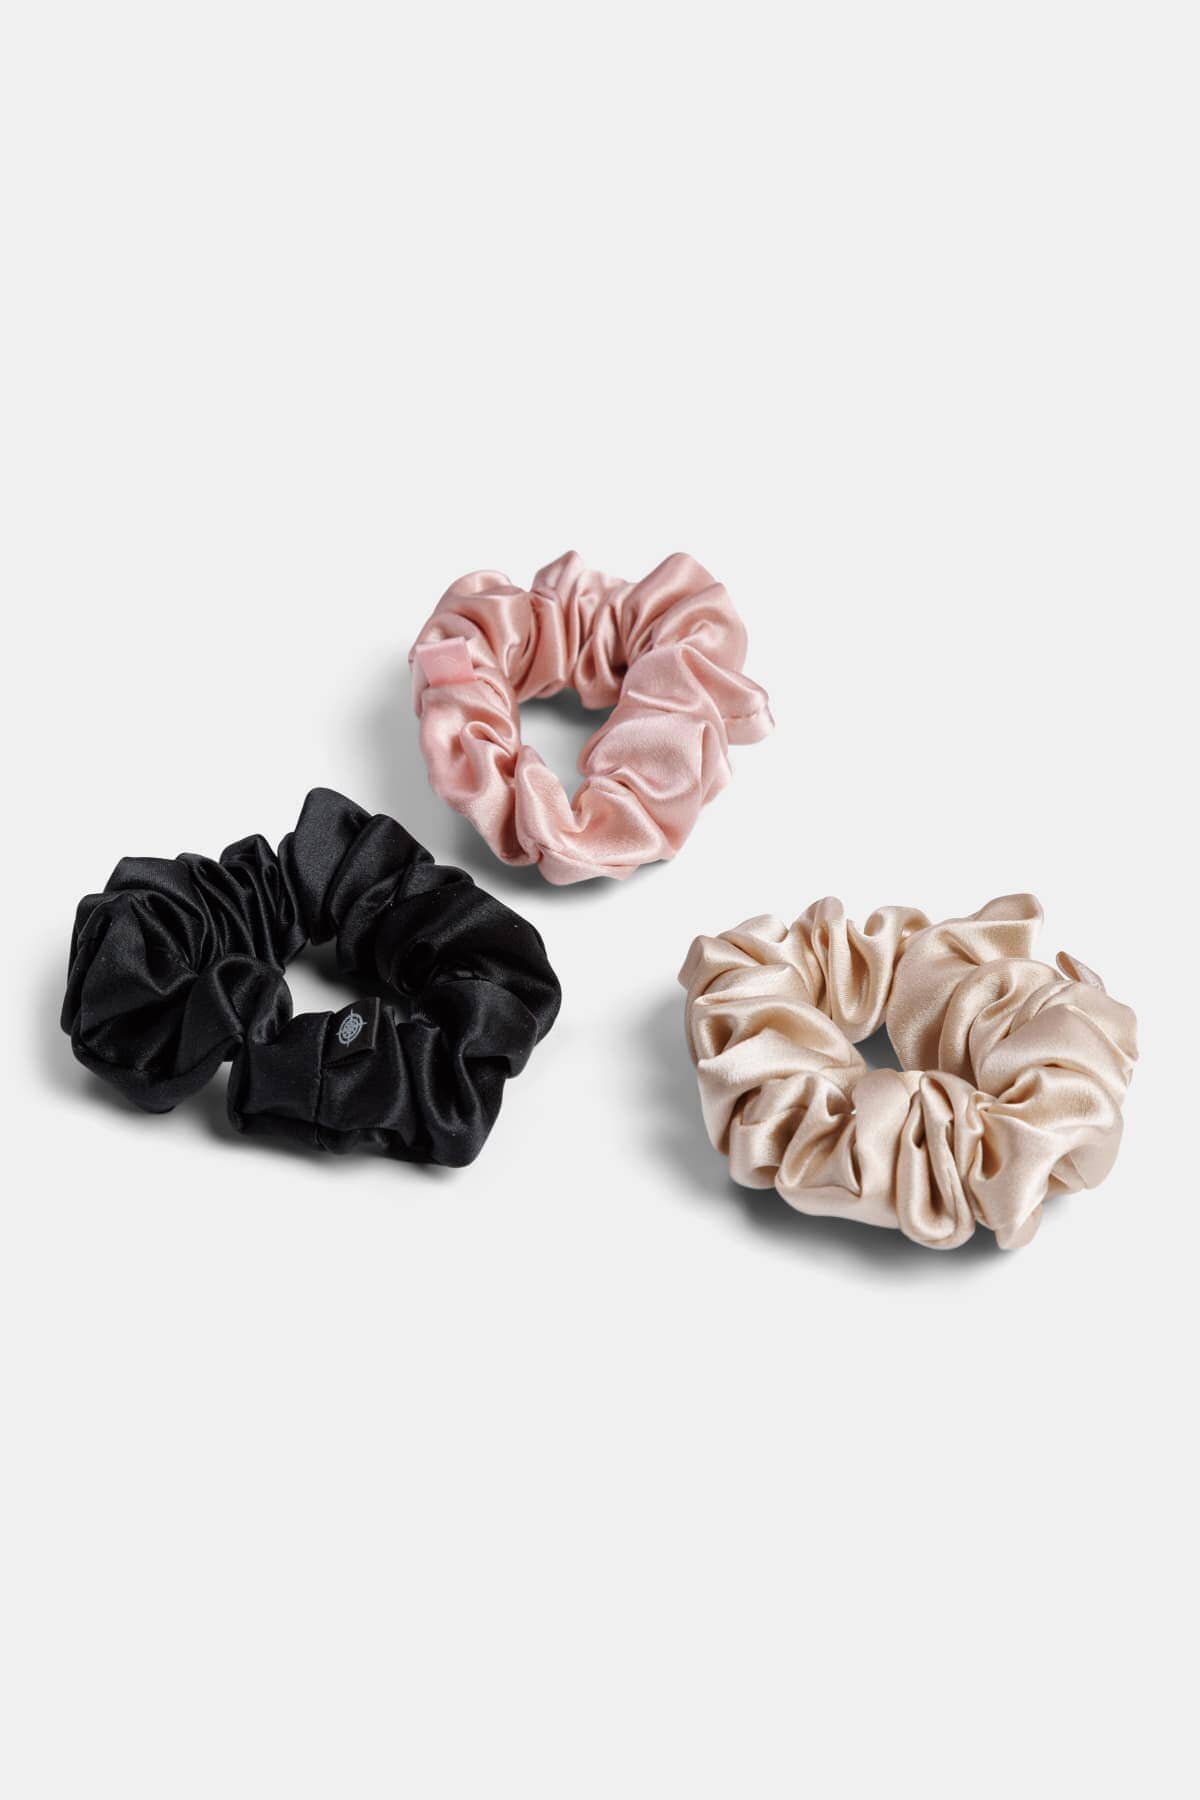 100% Pure Mulberry Silk Hair Scrunchies with Gift Box - Set of 3 Large Hair Ties Womens>Beauty>Hair Care Fishers Finery Pink-Taupe-Black 